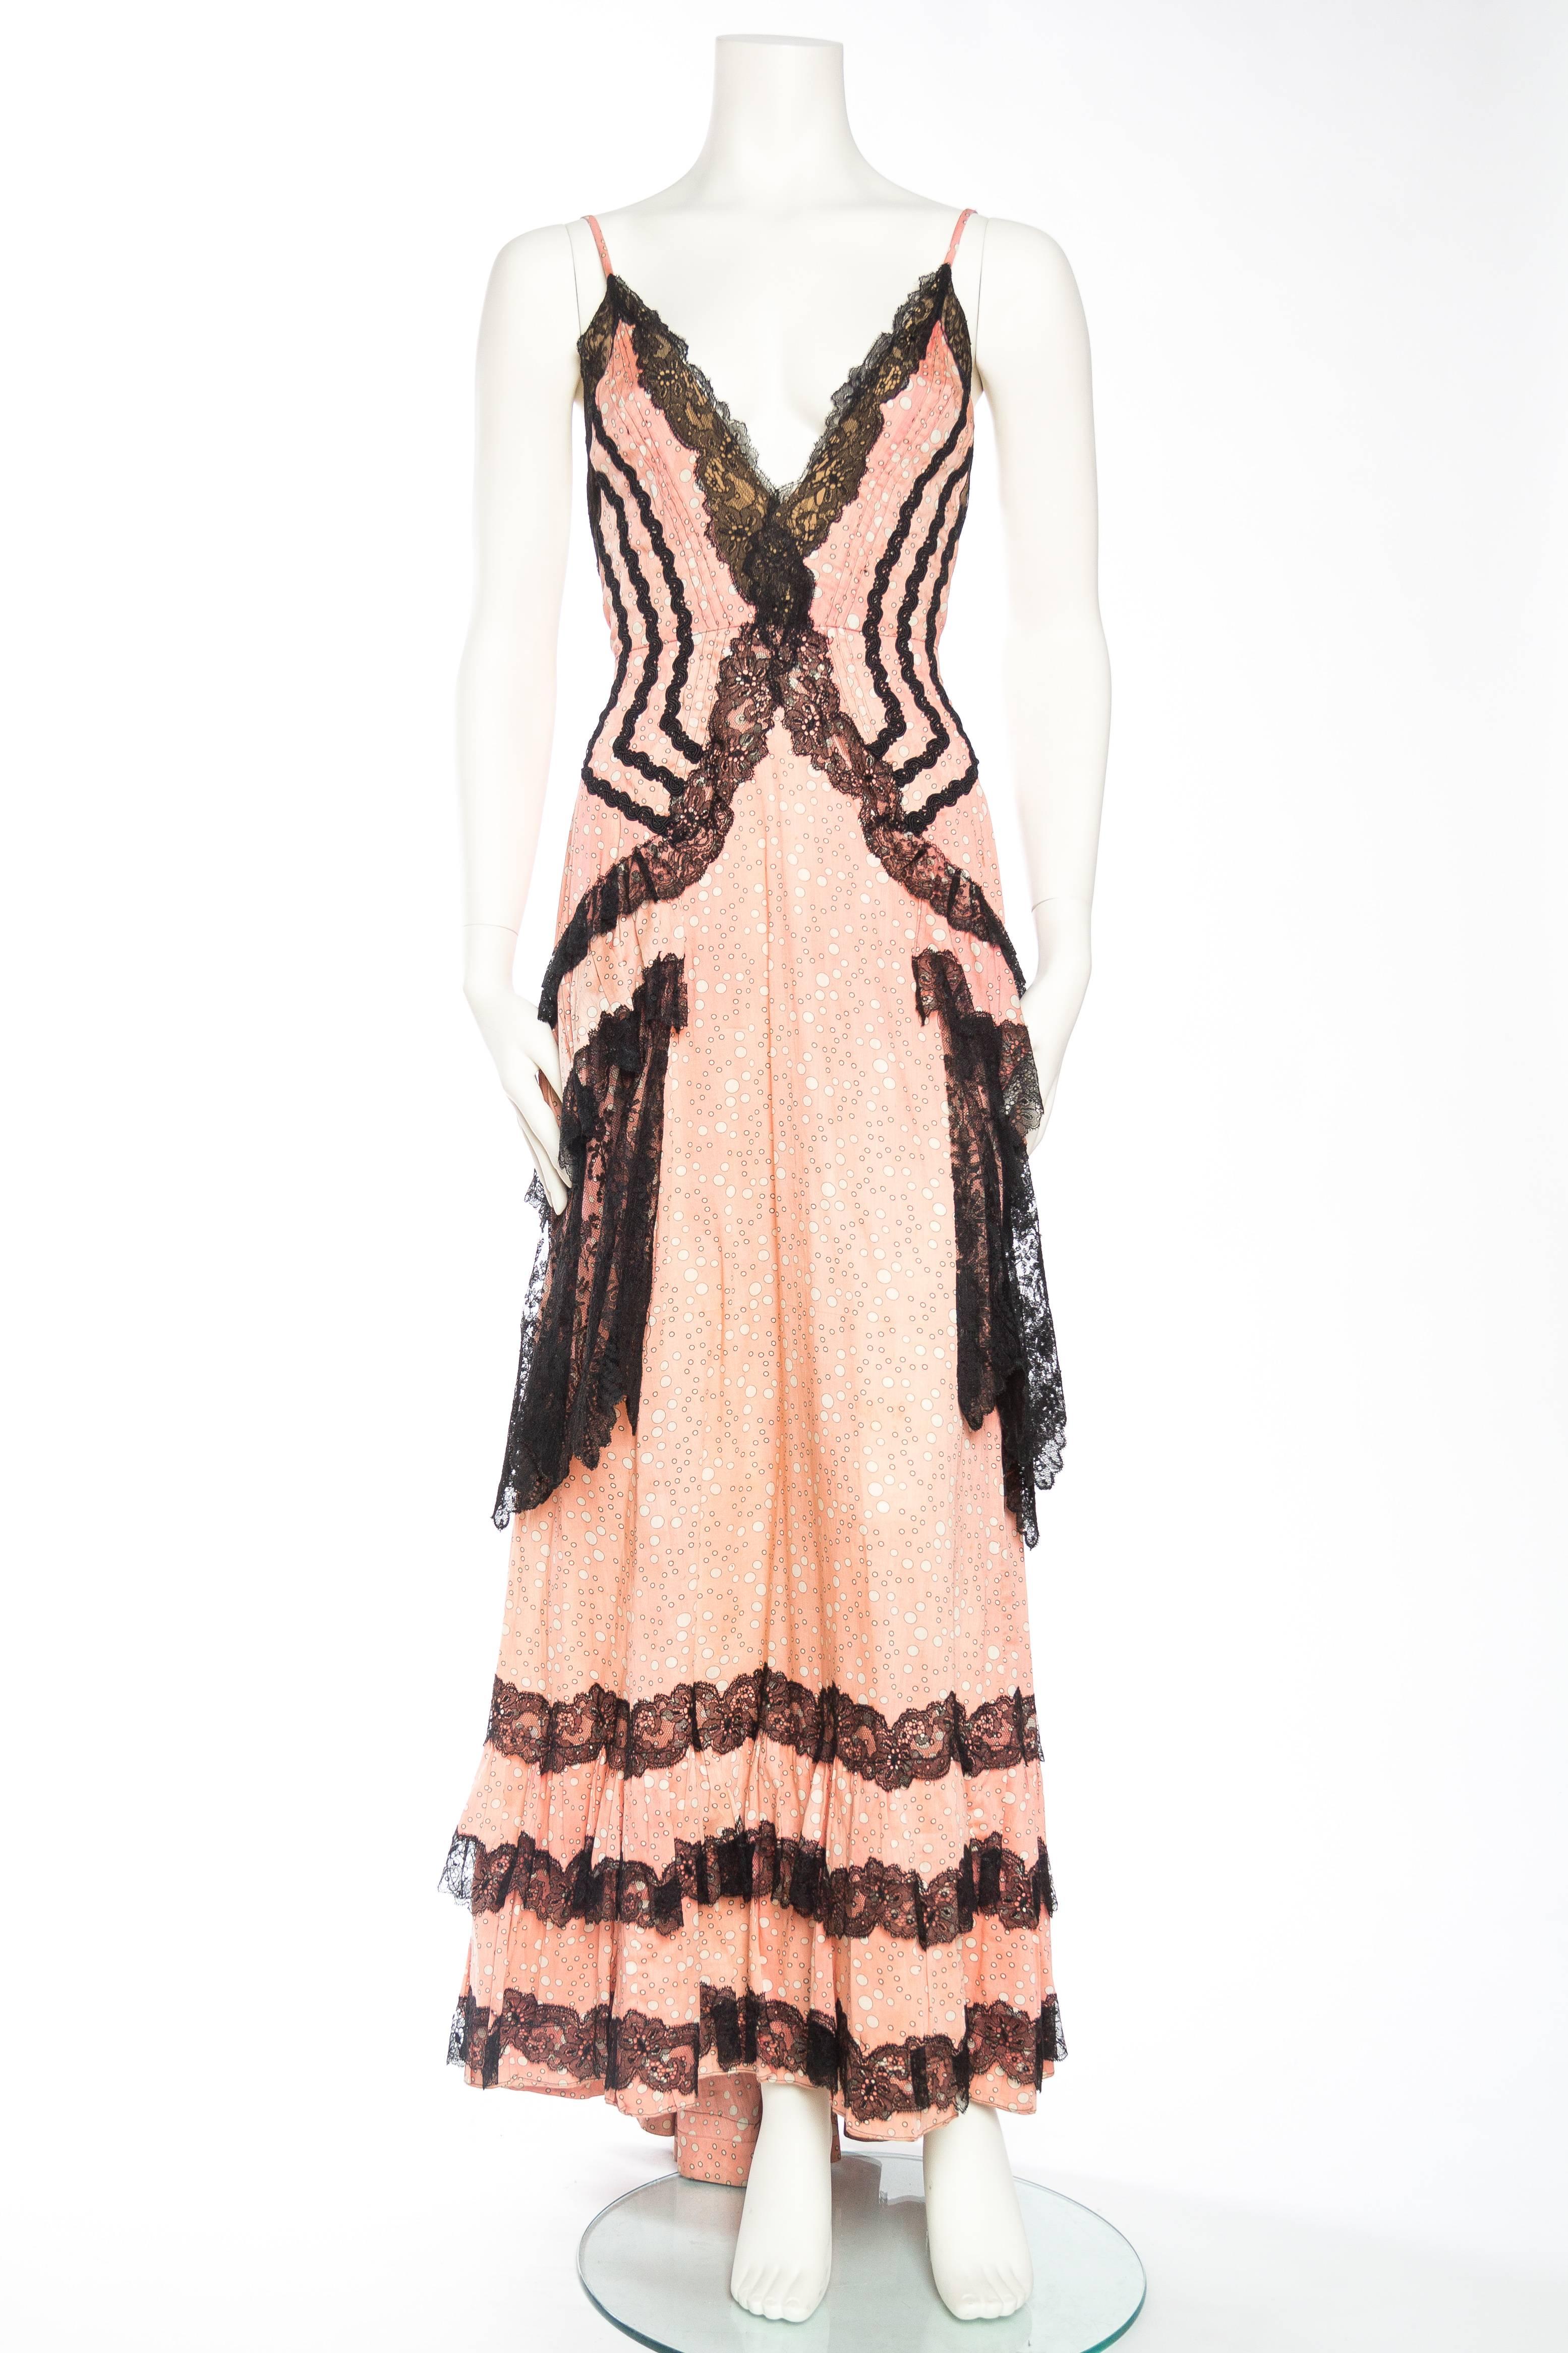 Reworked from an original 1890s ensemble this dress has the romance of the past with a sexy modern cut. 